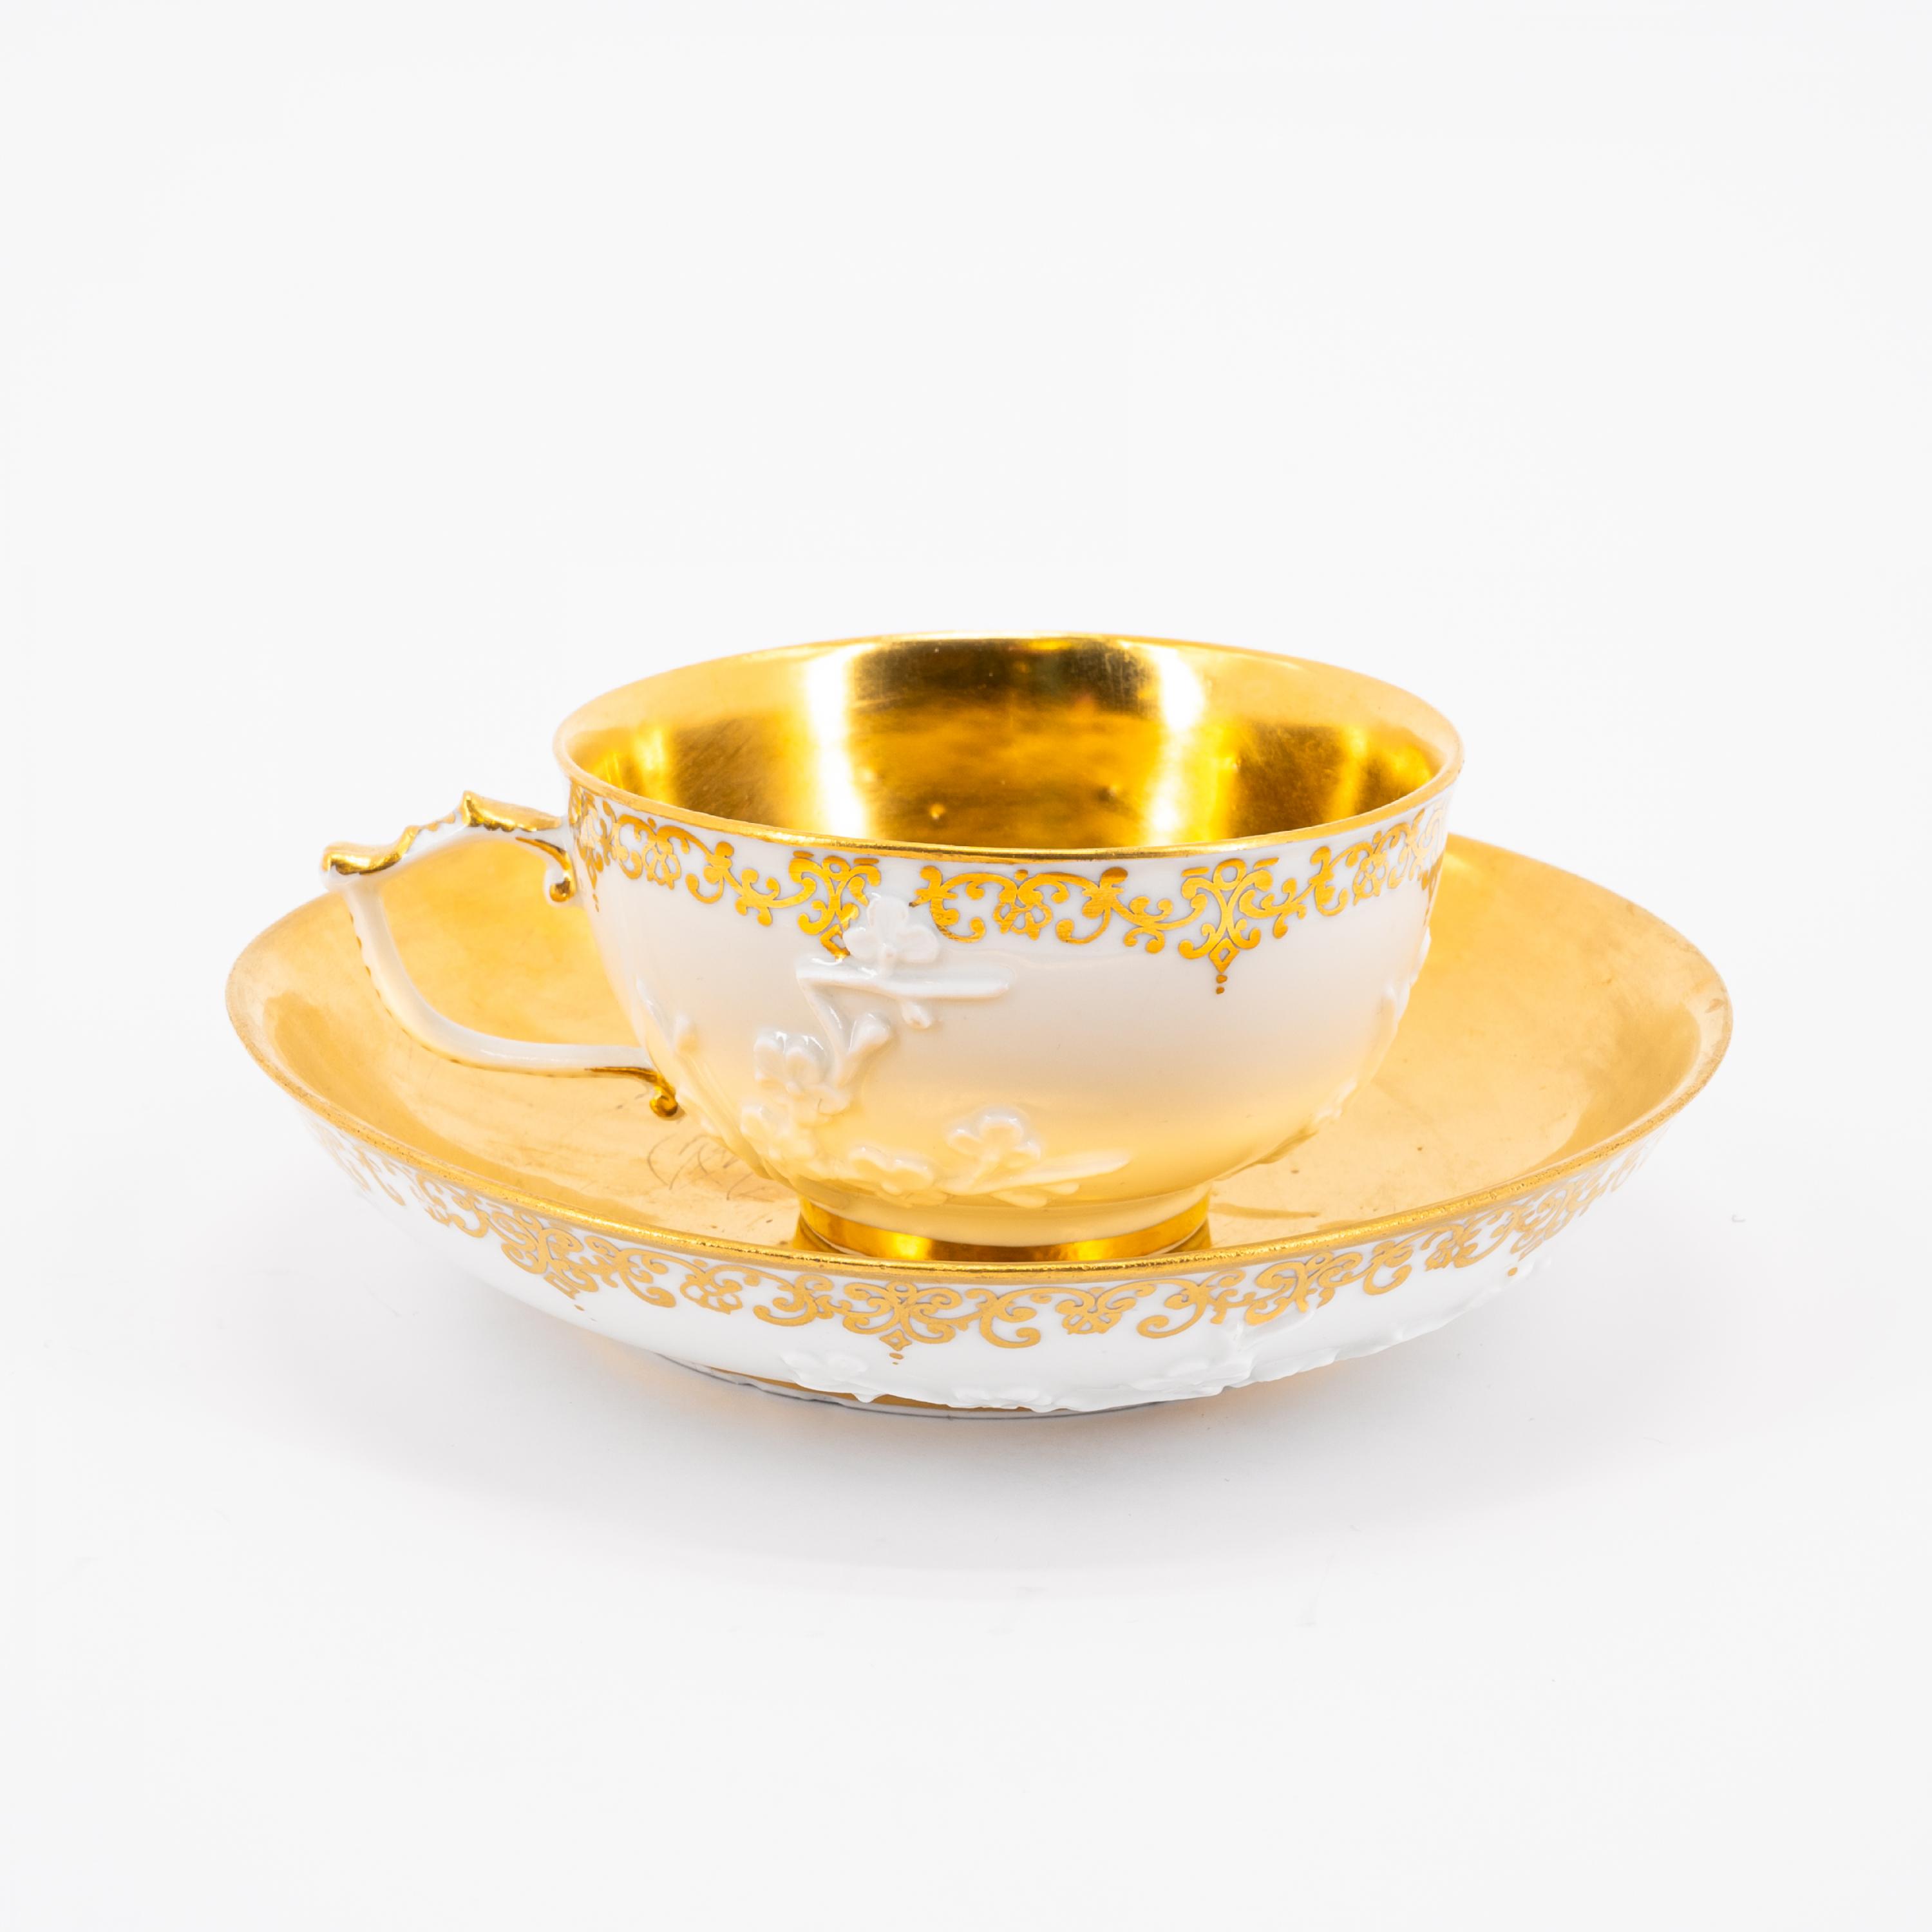 PORCELAIN ENSEMBLE OF SLOP BOWL, TWO CUPS AND SAUCERS WITH GILDED DECOR - Image 8 of 16